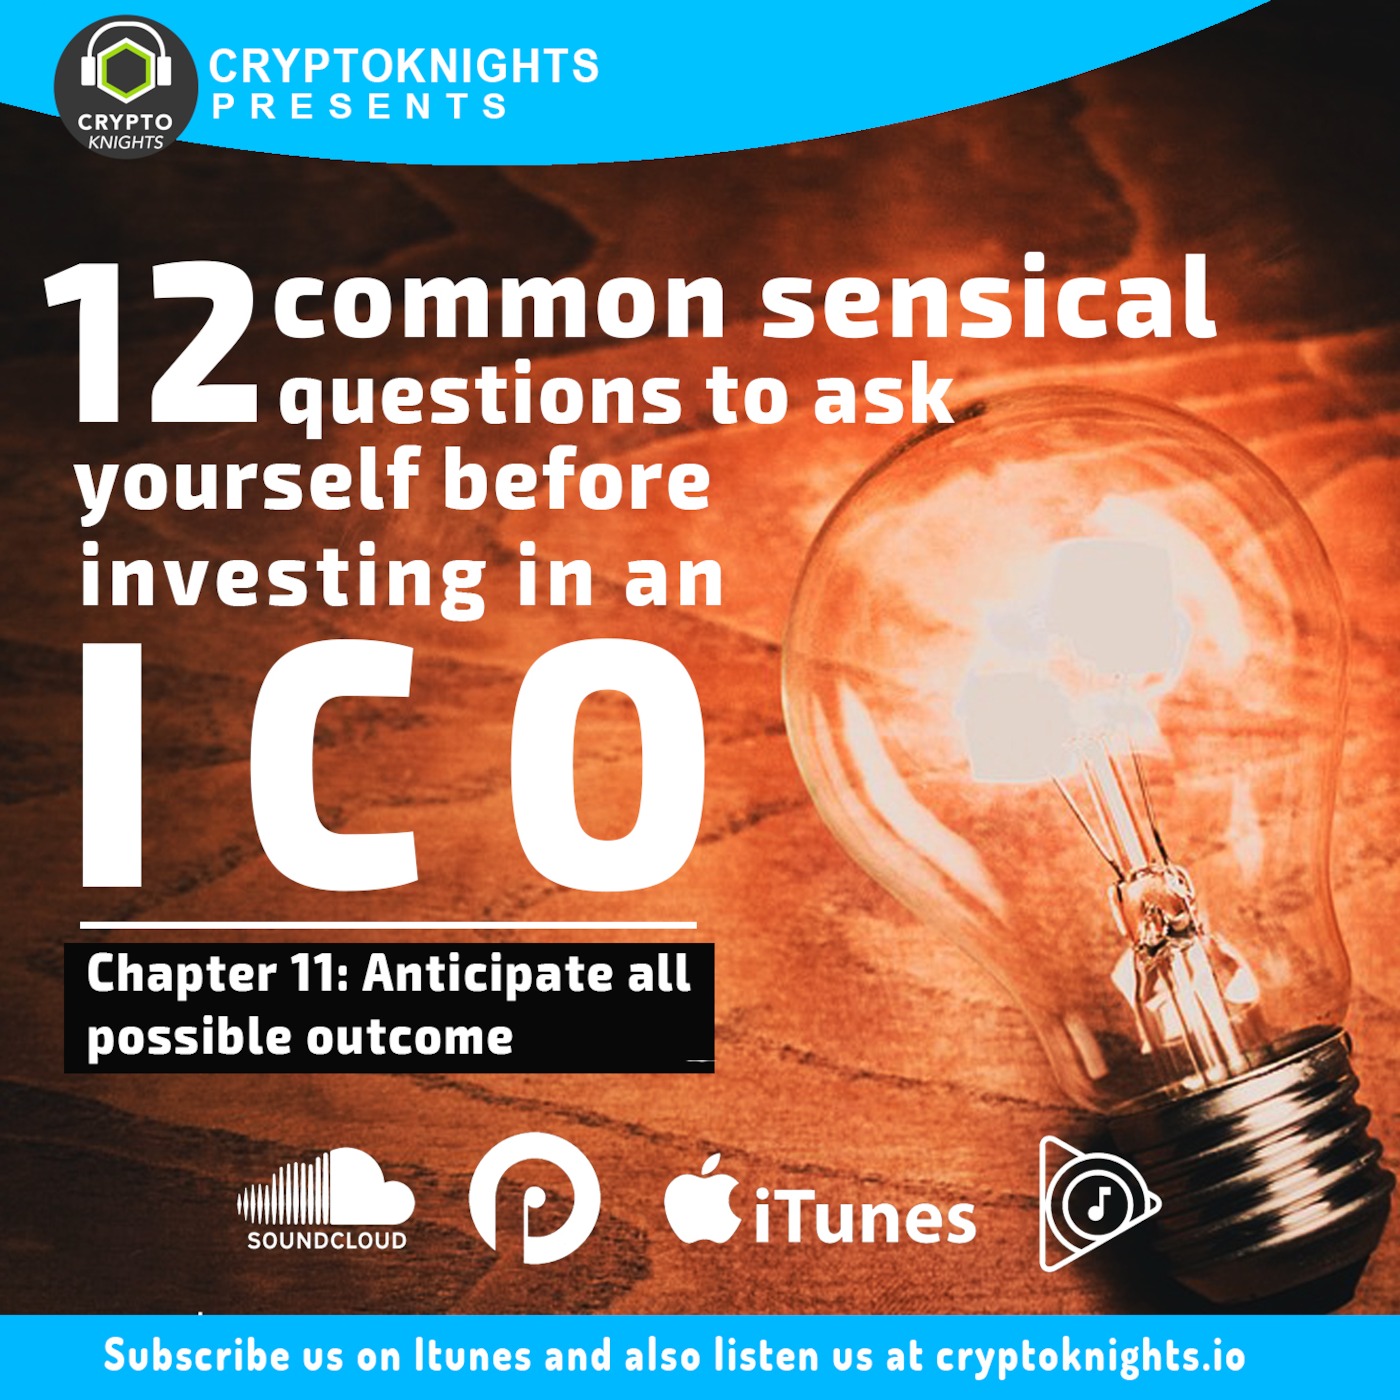 12 Common Sensical Questions to Ask Yourself Before Investing in an ICO. Chapter:11 Anticipate all Possible Outcomes